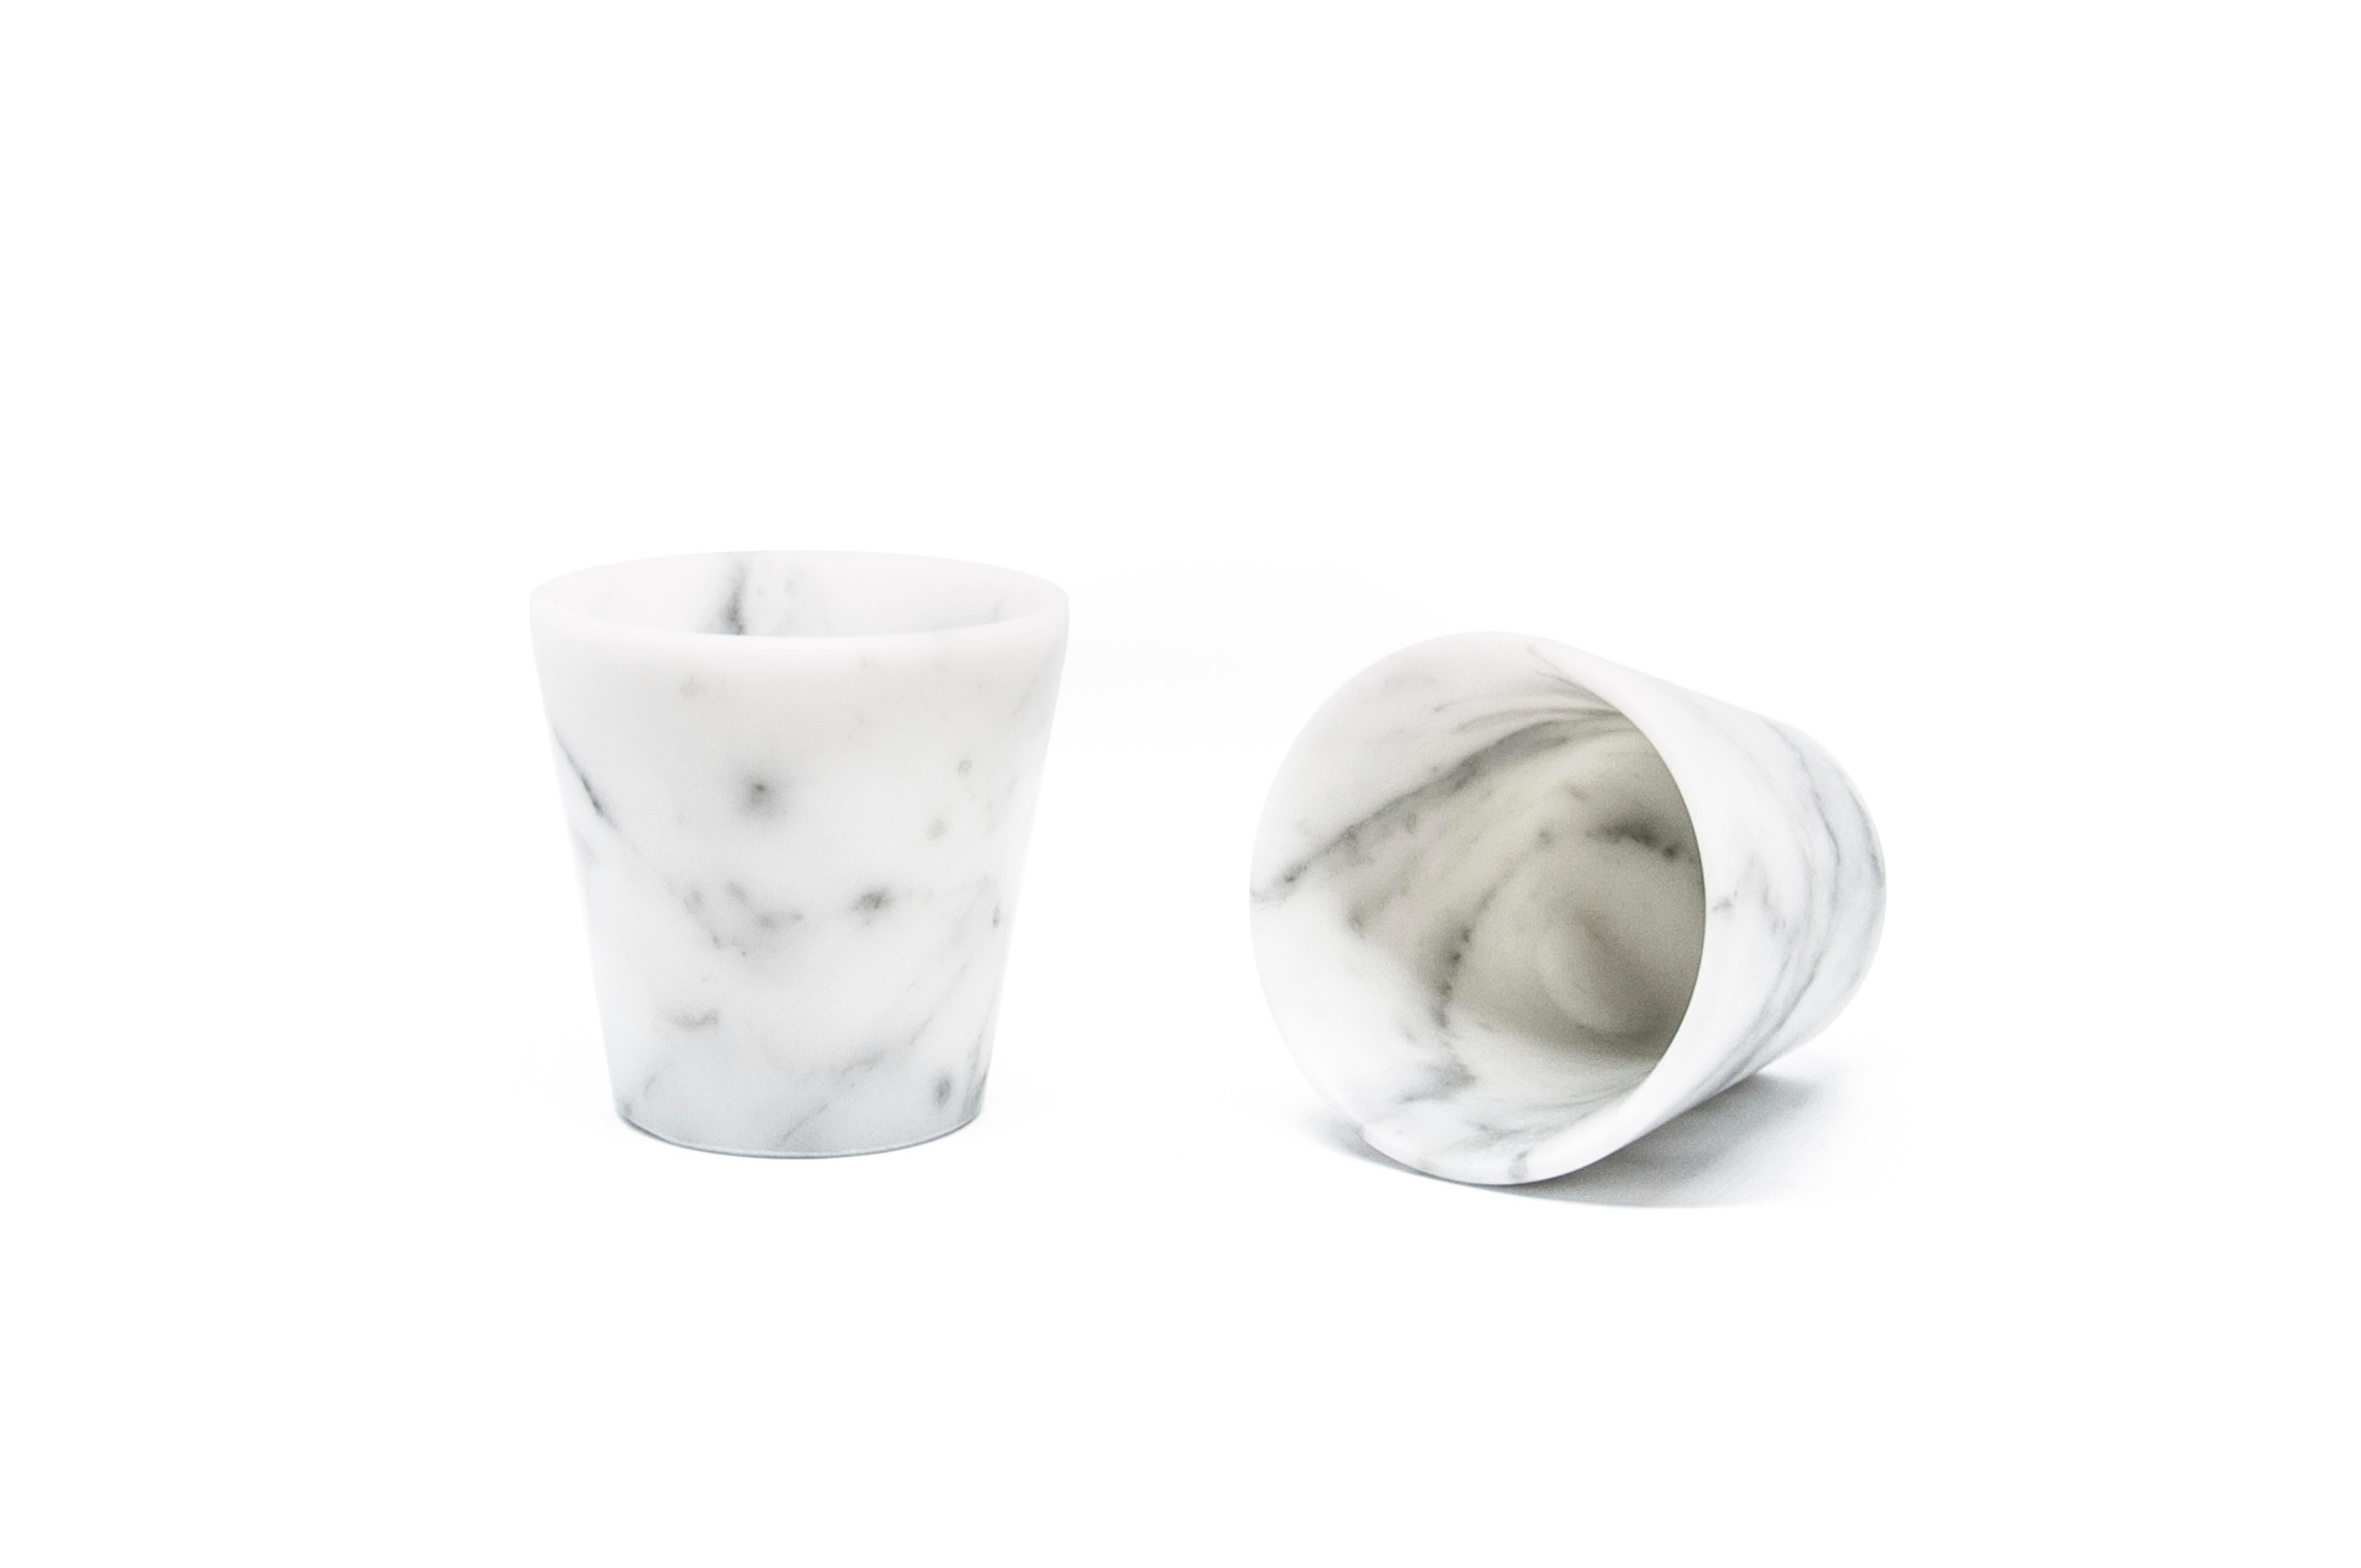 Grappa glass in white Carrara marble, extracted and processed in Italy. You have a 100% made in Italy product.
Each piece is in a way unique (since each marble block is different in veins and shades) and handmade by Italian artisans specialized